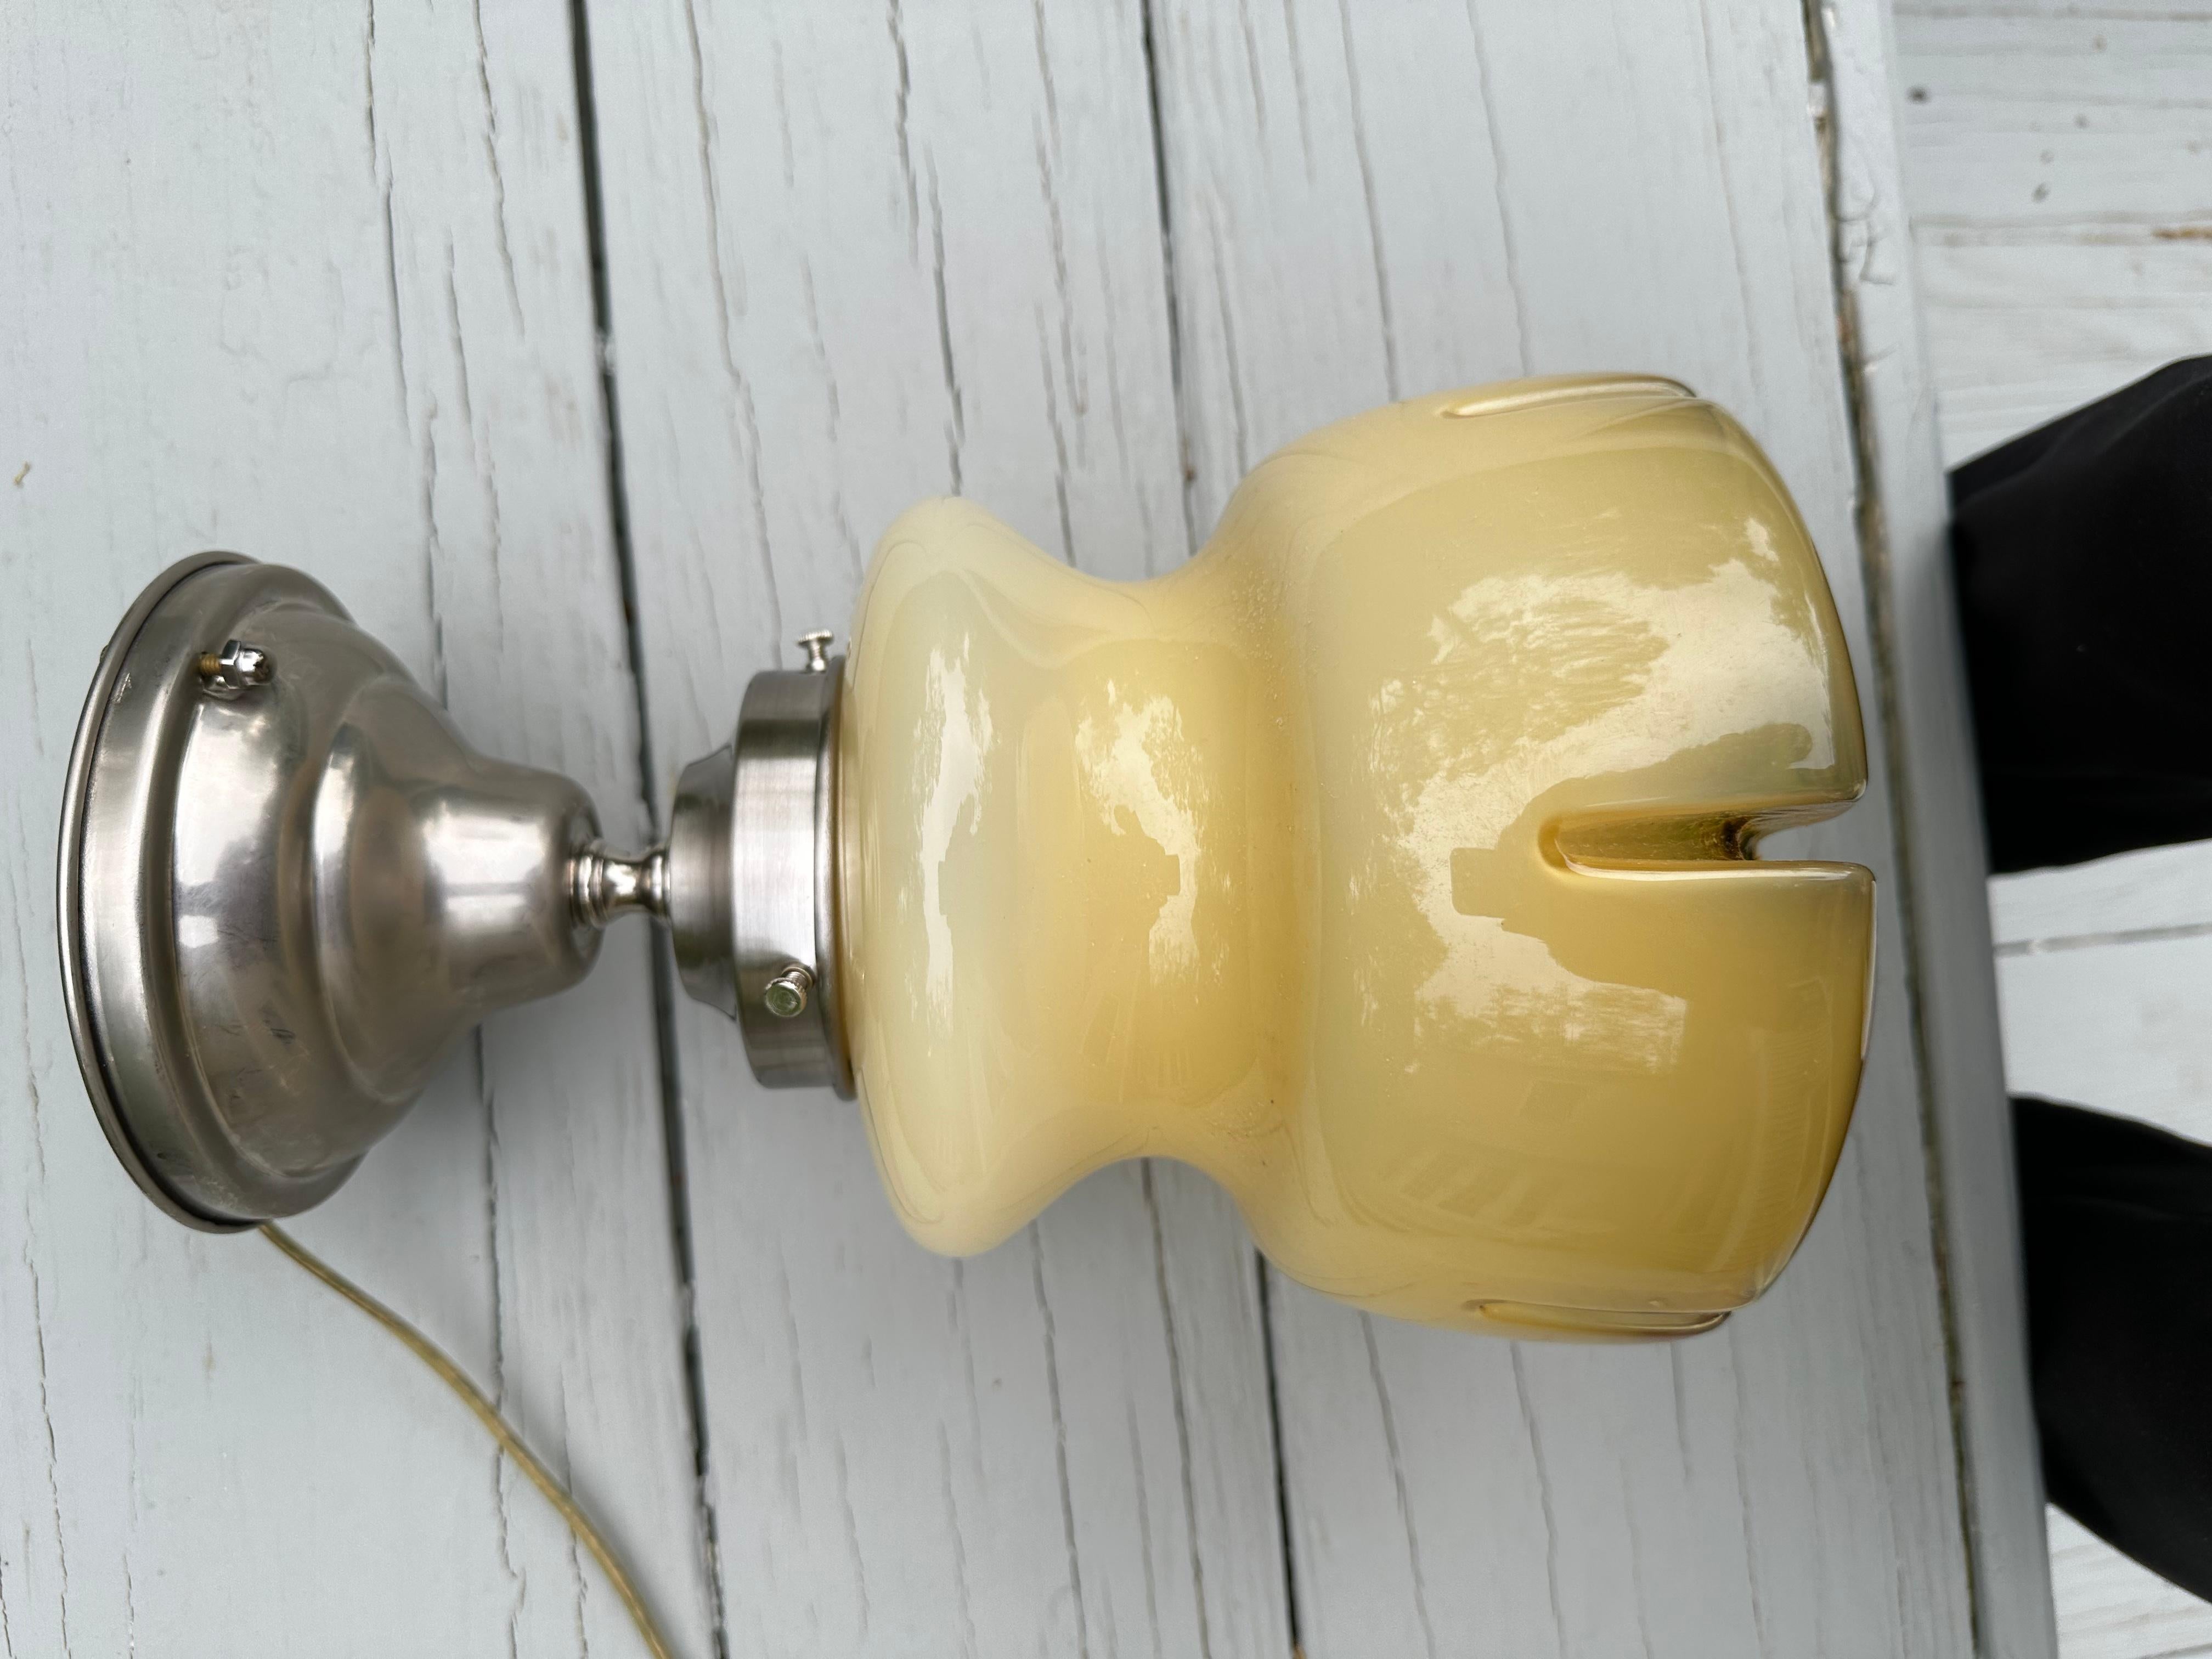 Old Lights On is pleased to offer this vintage Murano shade on a brushed nickel semi flush ceiling fixture. It is rewired and ready to install. We ship everywhere. It goes well with other fixtures and furnishings. Follow us here for more great